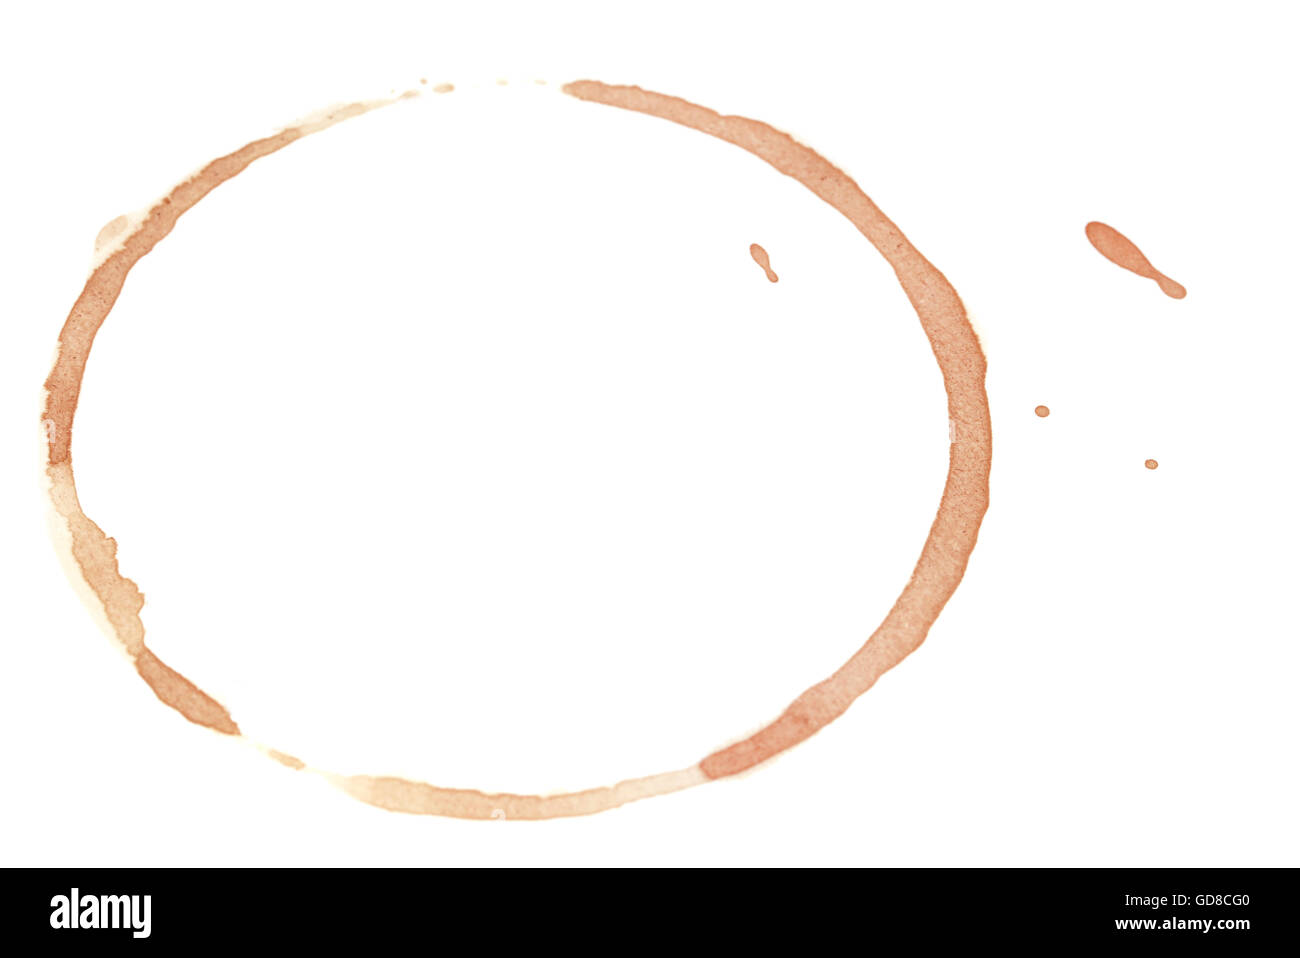 Coffee stain over white background Stock Photo